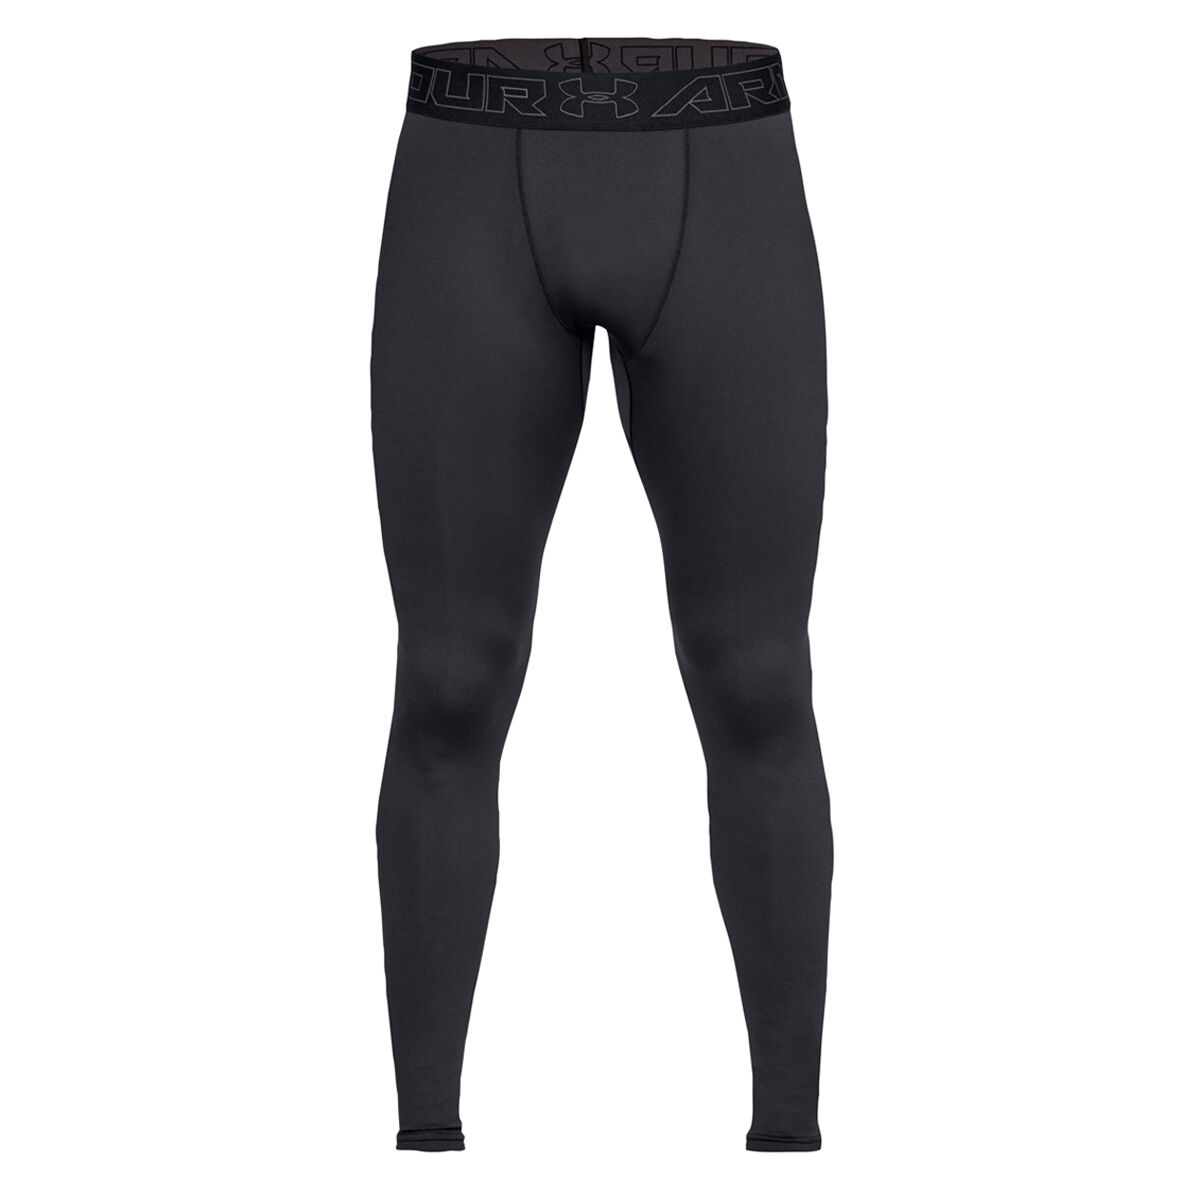 Mens Under Armour Compression Leggings (Size Small Only) – King Sports